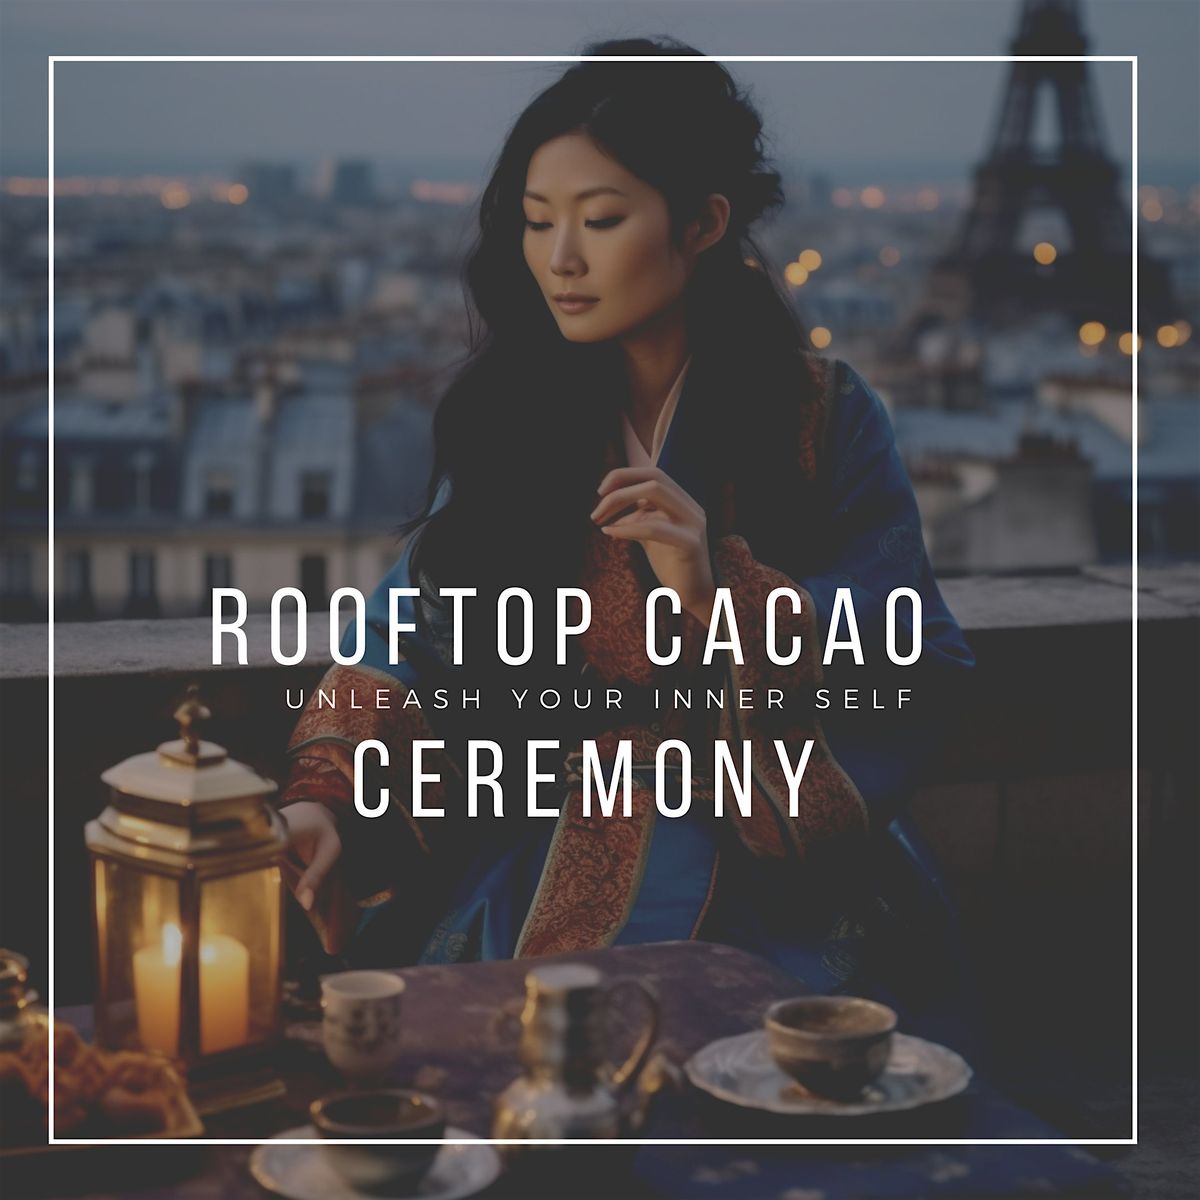 Rooftop Cacao Ceremony & Gourmet Dinner Celebration